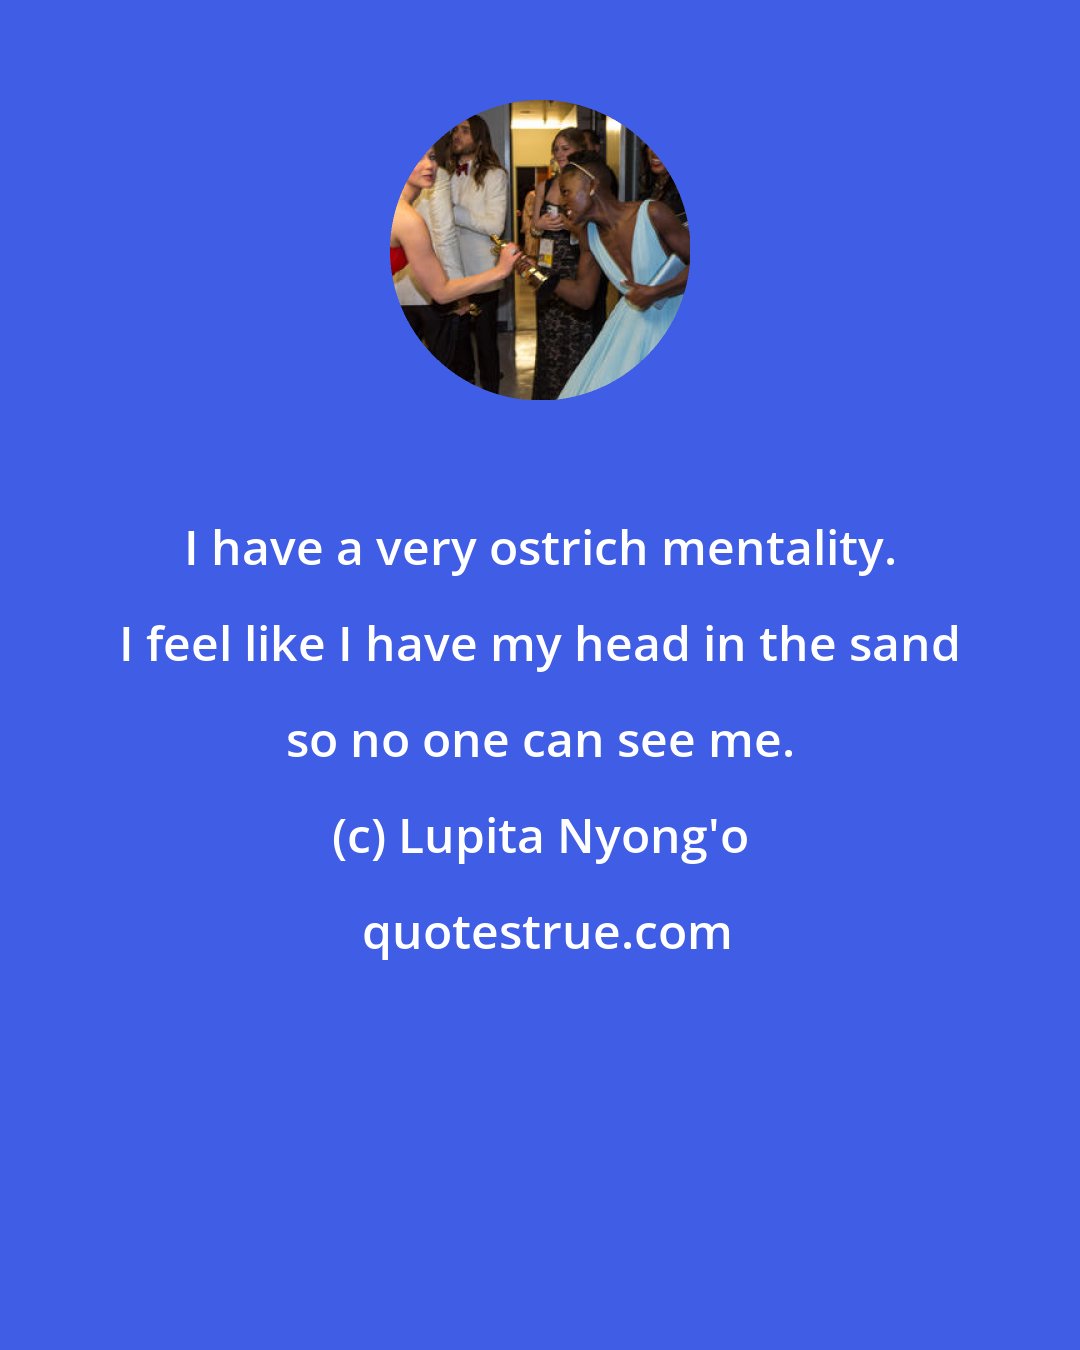 Lupita Nyong'o: I have a very ostrich mentality. I feel like I have my head in the sand so no one can see me.